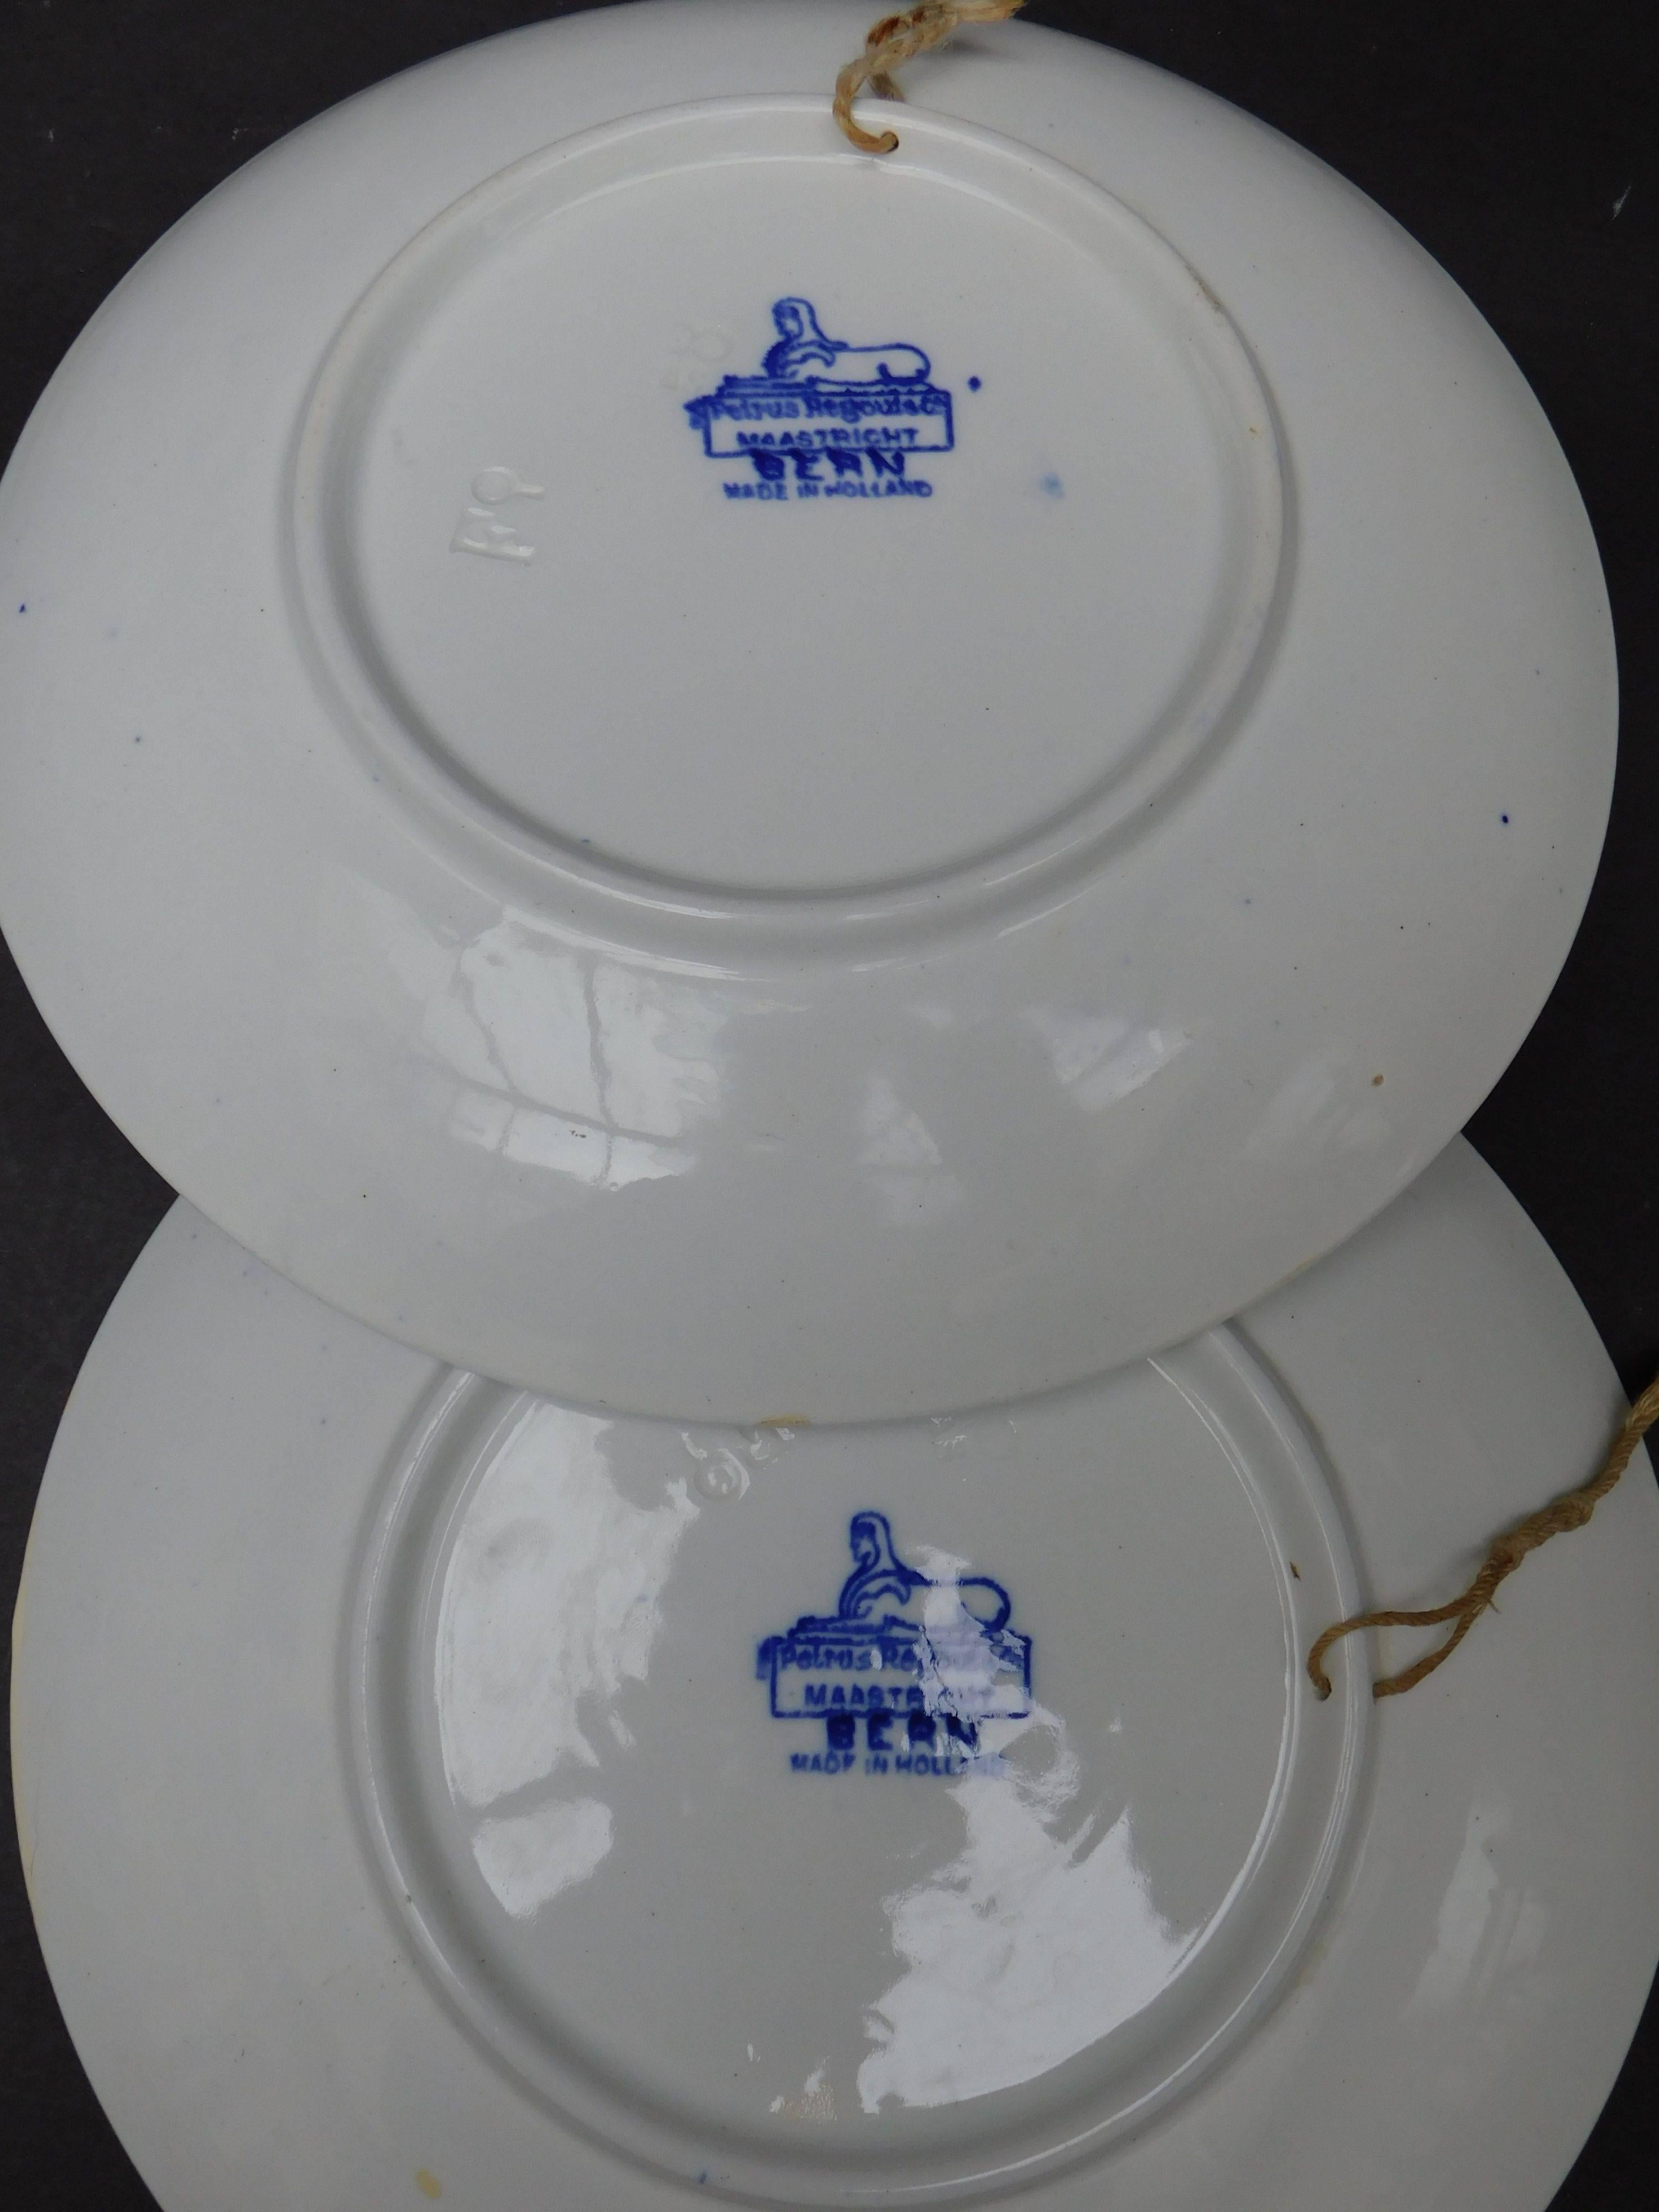 A fine example of Dutch transfer ware, these plates were made in Maastricht Holland by the Petrus Regout company towards the end of the 19th century.
Both plates are marked on the reverse with the 